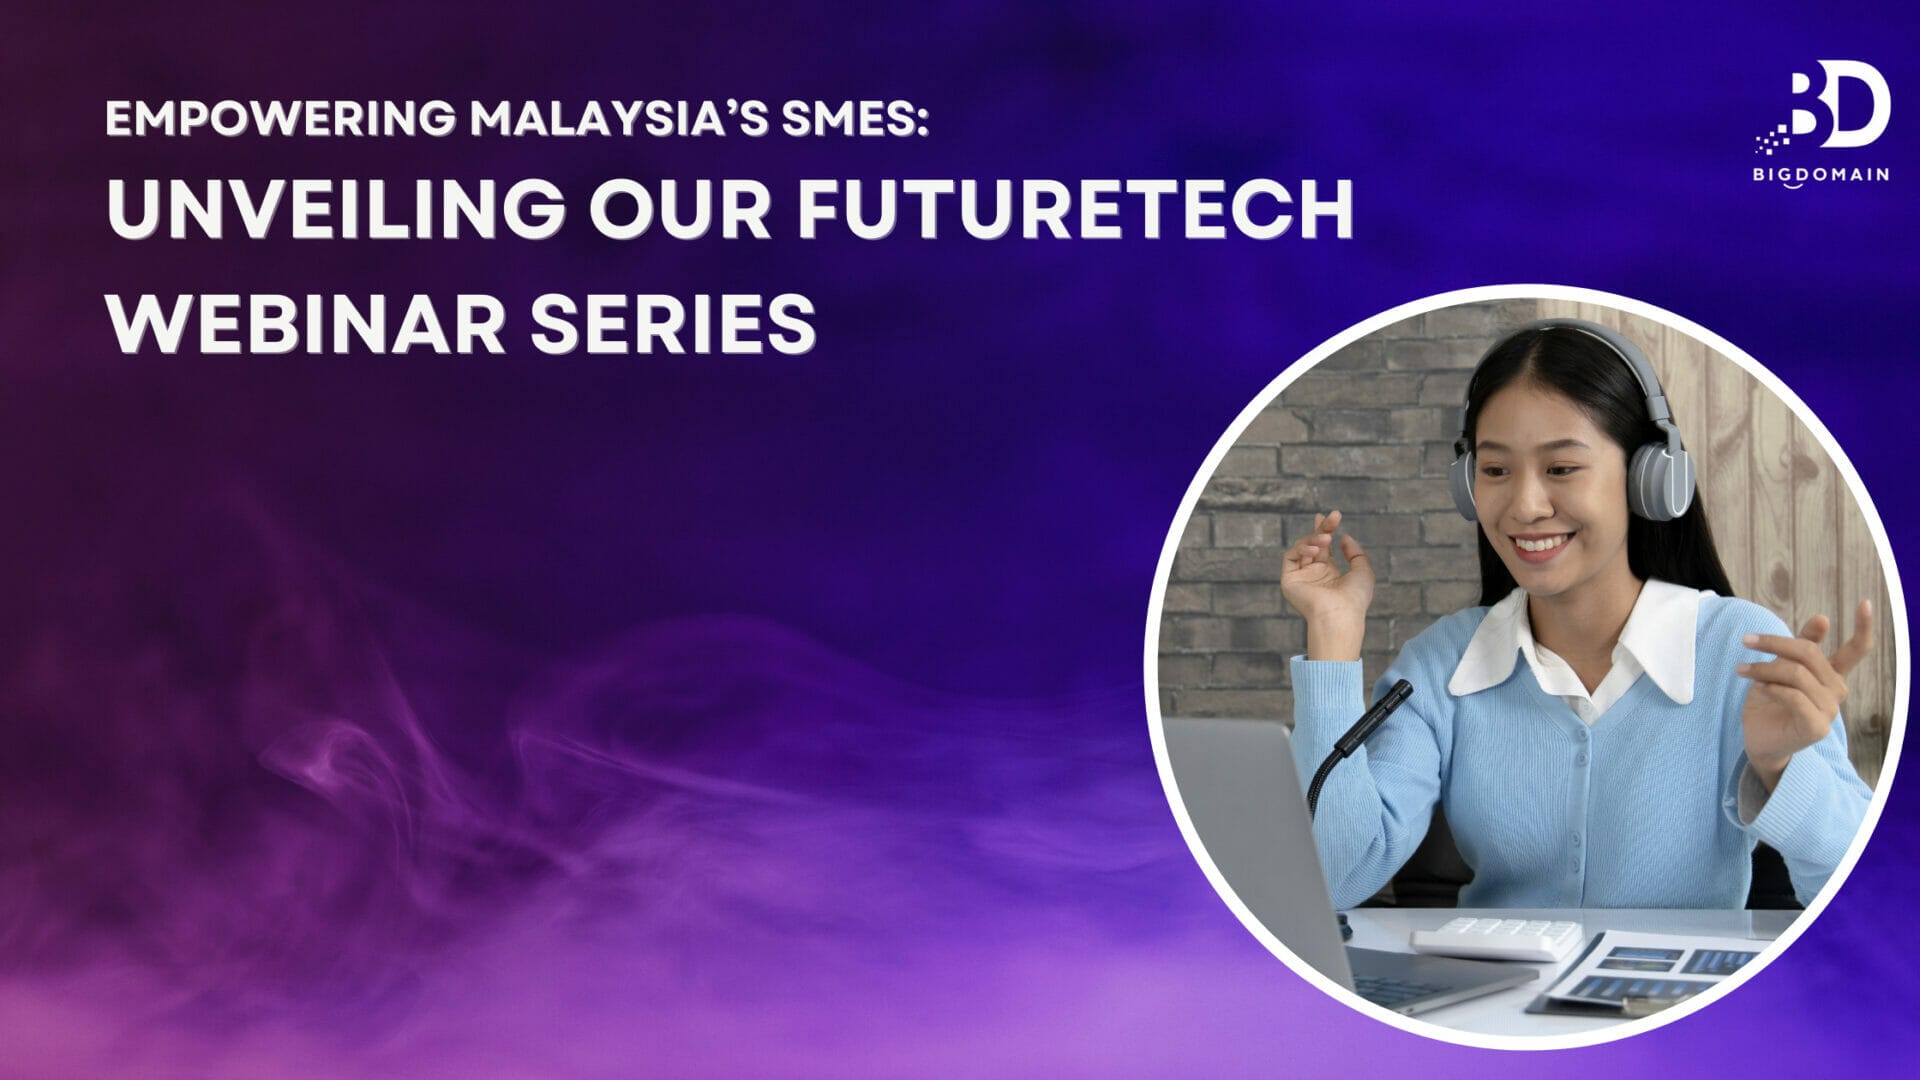 Empowering Malaysia’s SMEs: Unveiling Our FutureTech Webinar Series